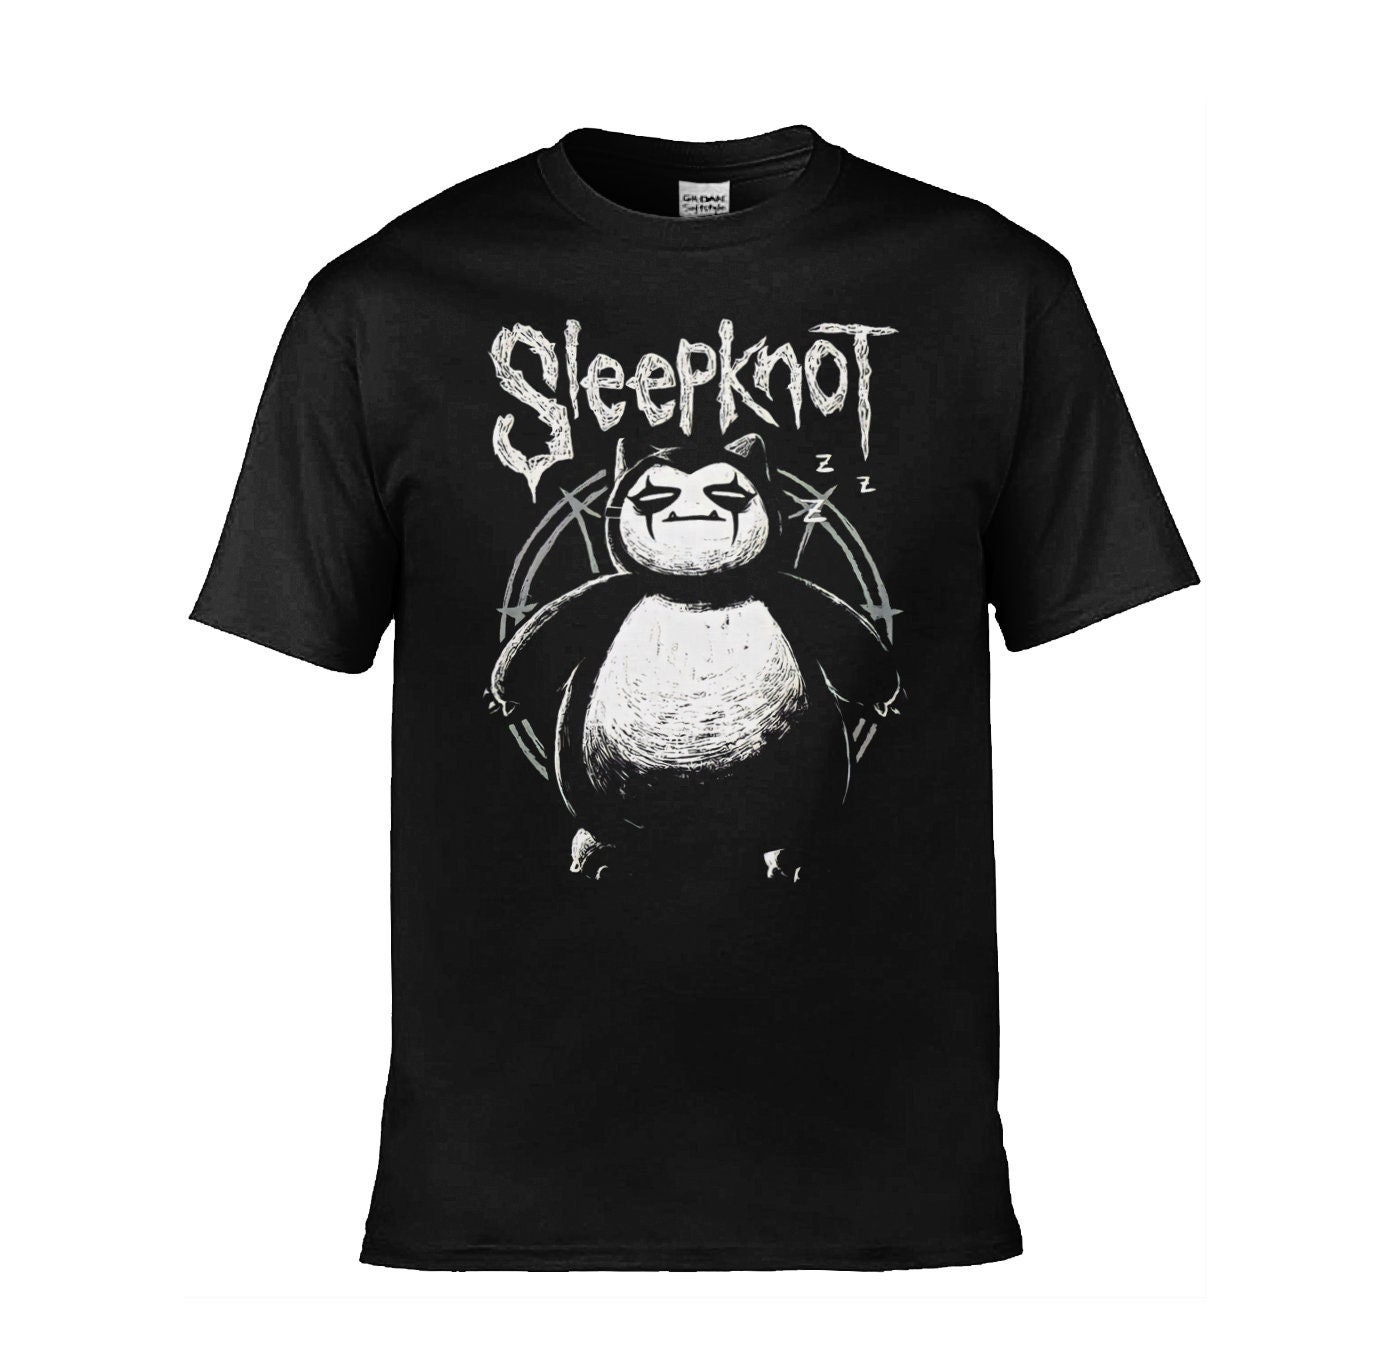 Discover SleepKnot Classic Adult T-Shirt